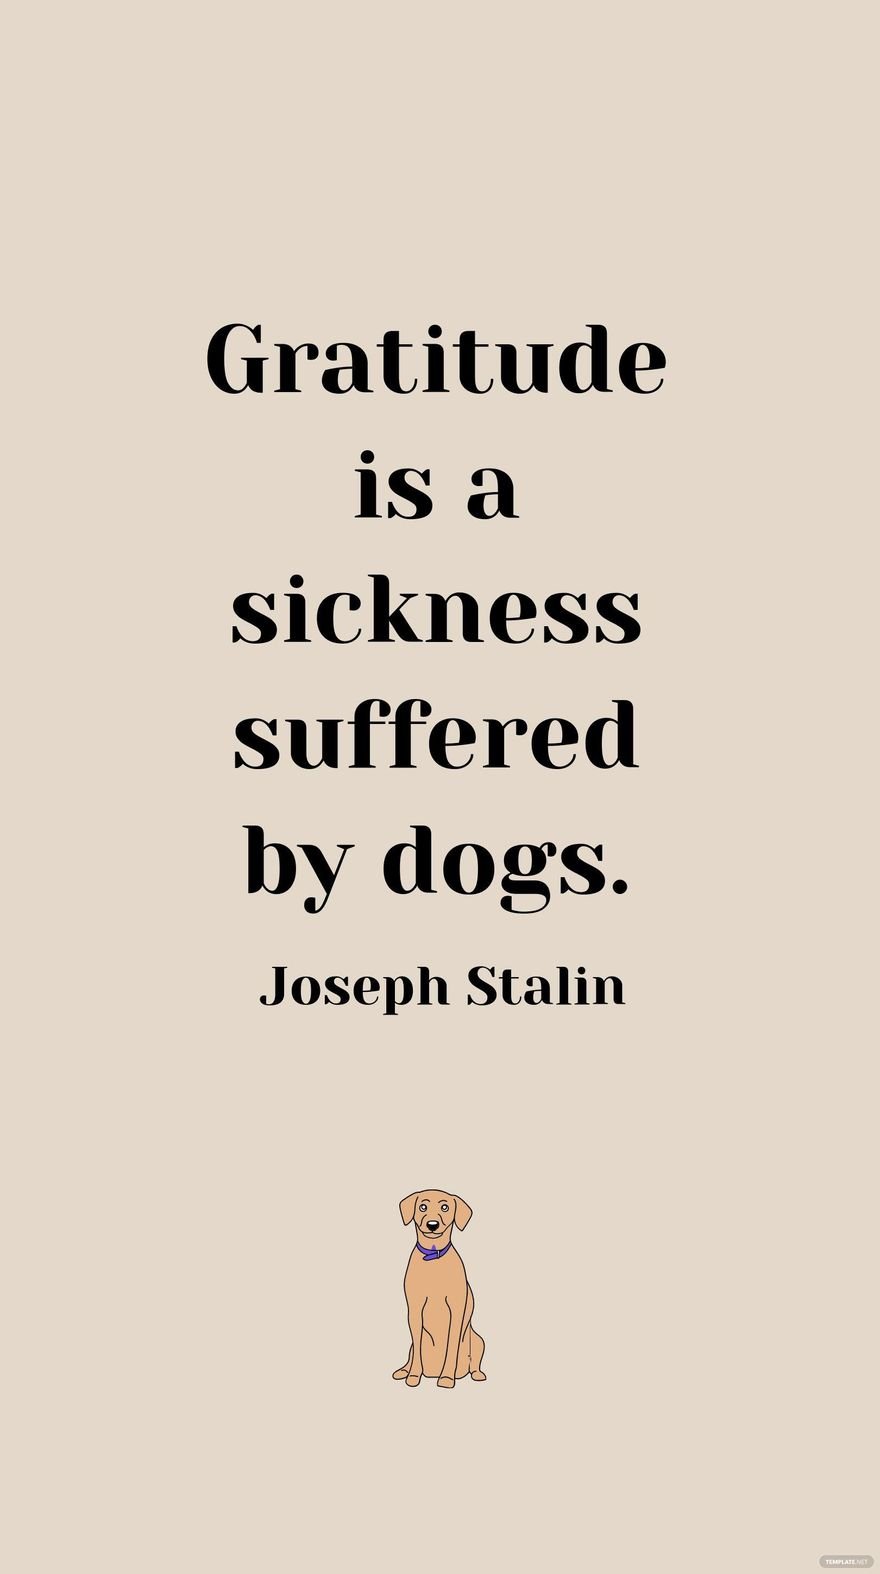 Joseph Stalin - Gratitude is a sickness suffered by dogs.